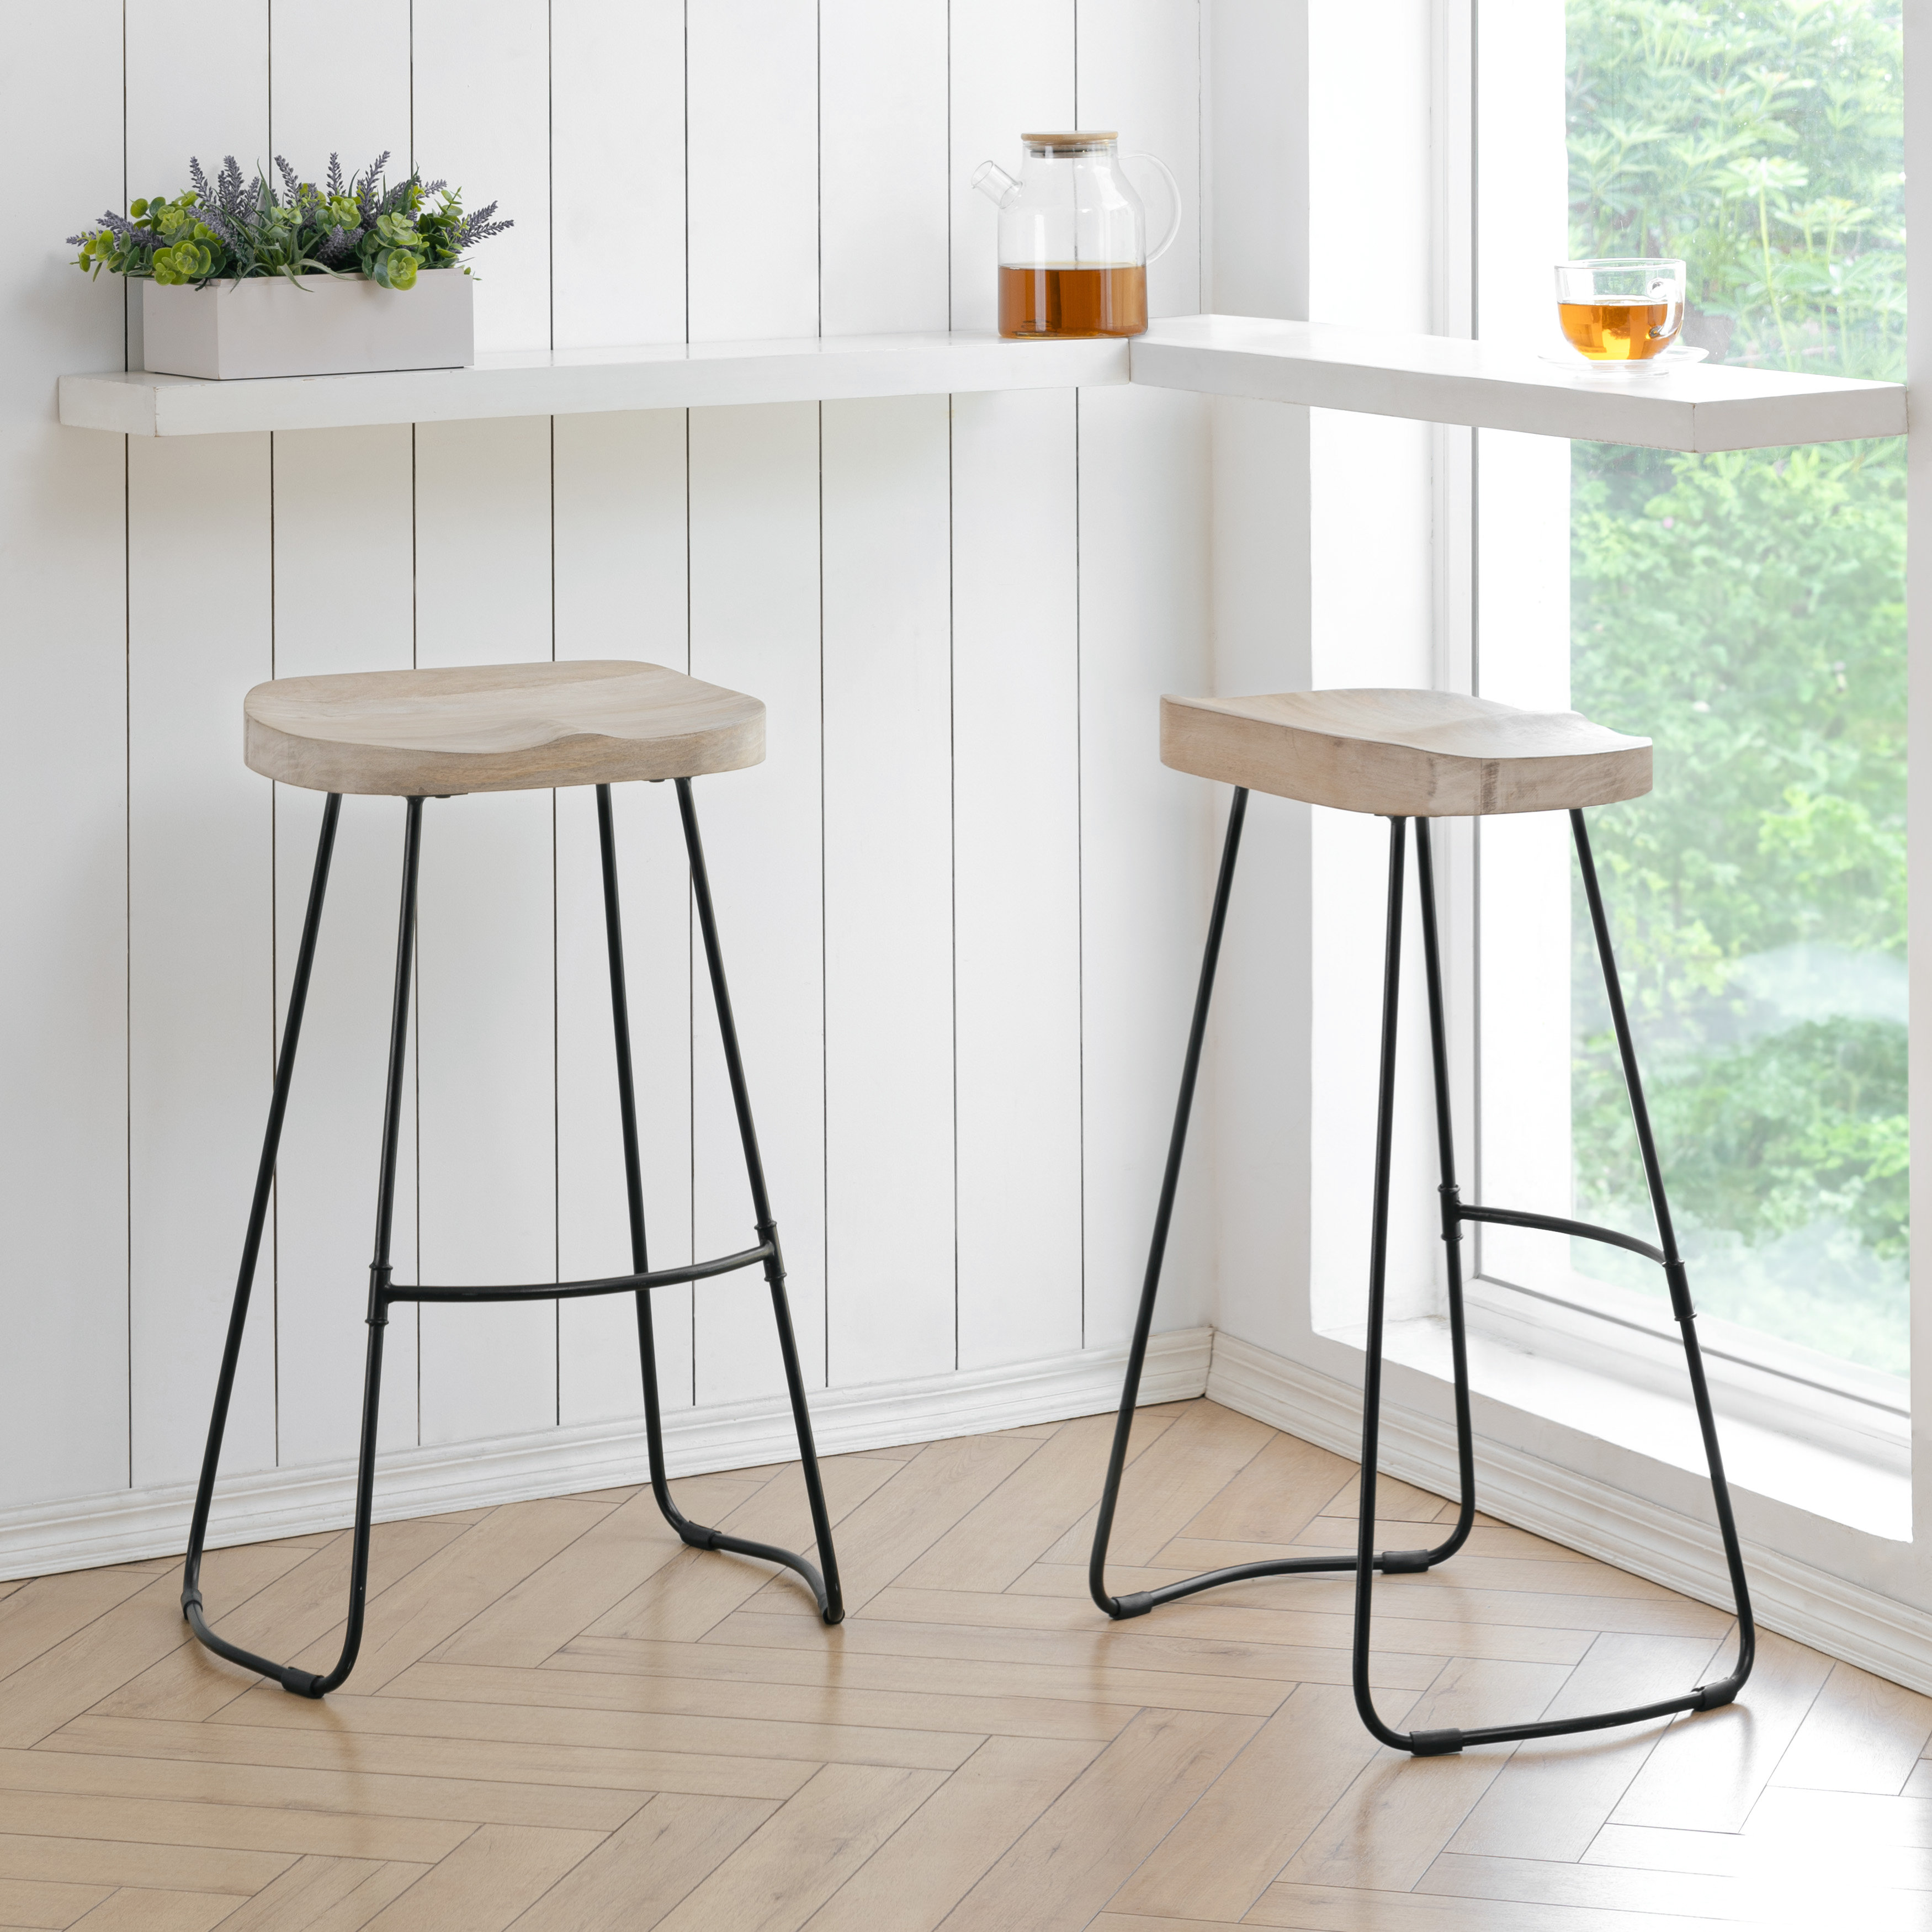 Buy Wooden stool online, Foot Rest Stools for Living Room